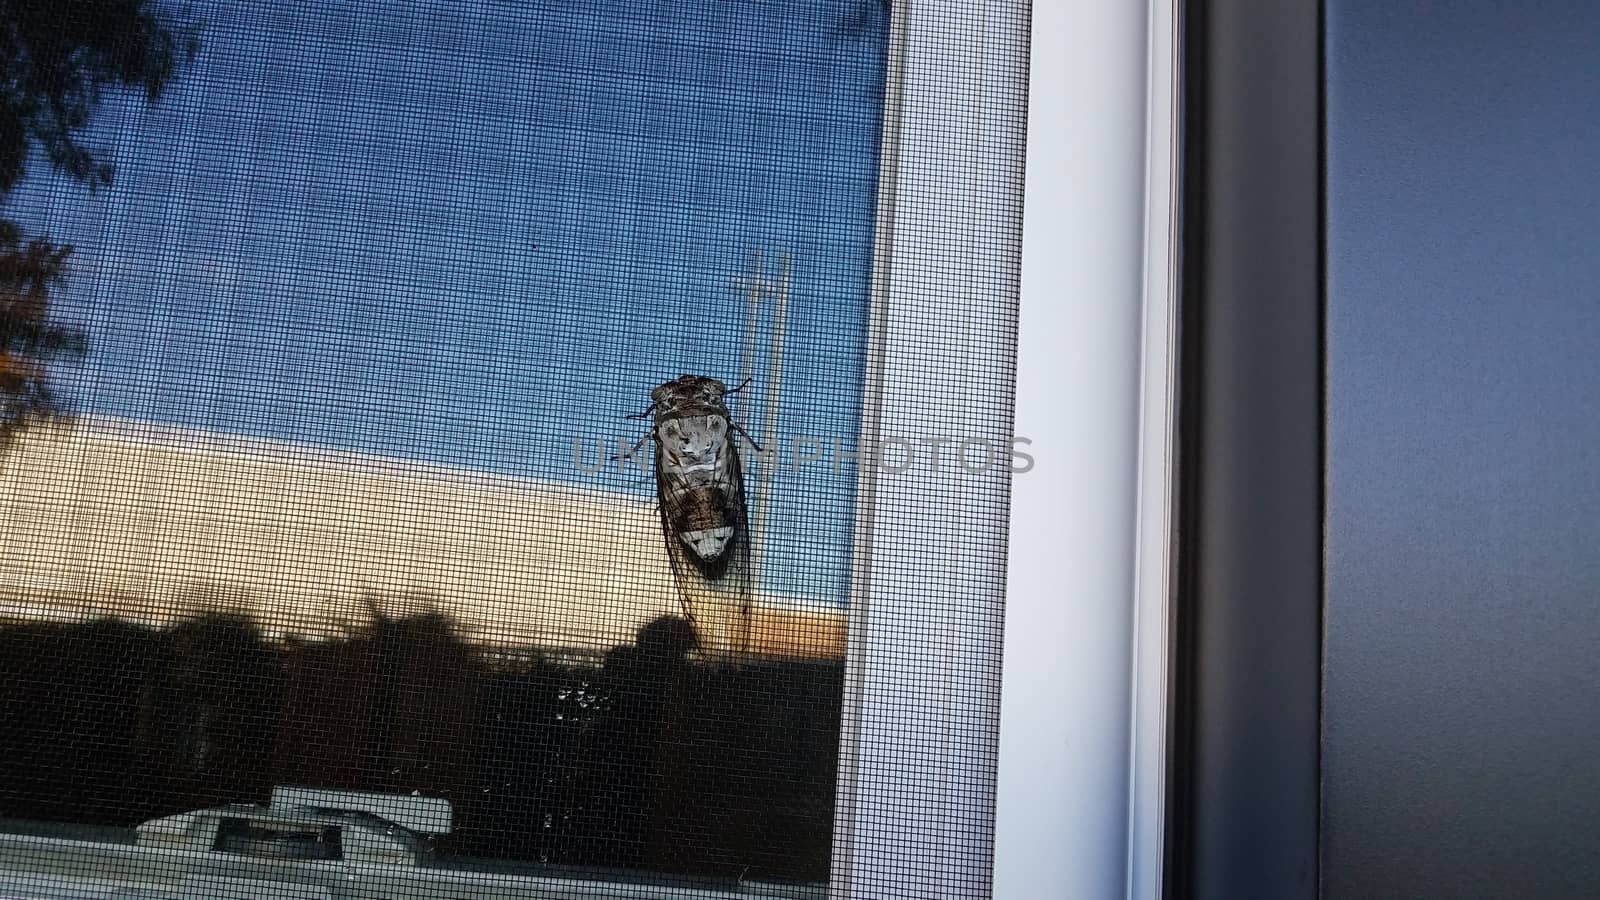 cicada insect or bug with wings on window screen